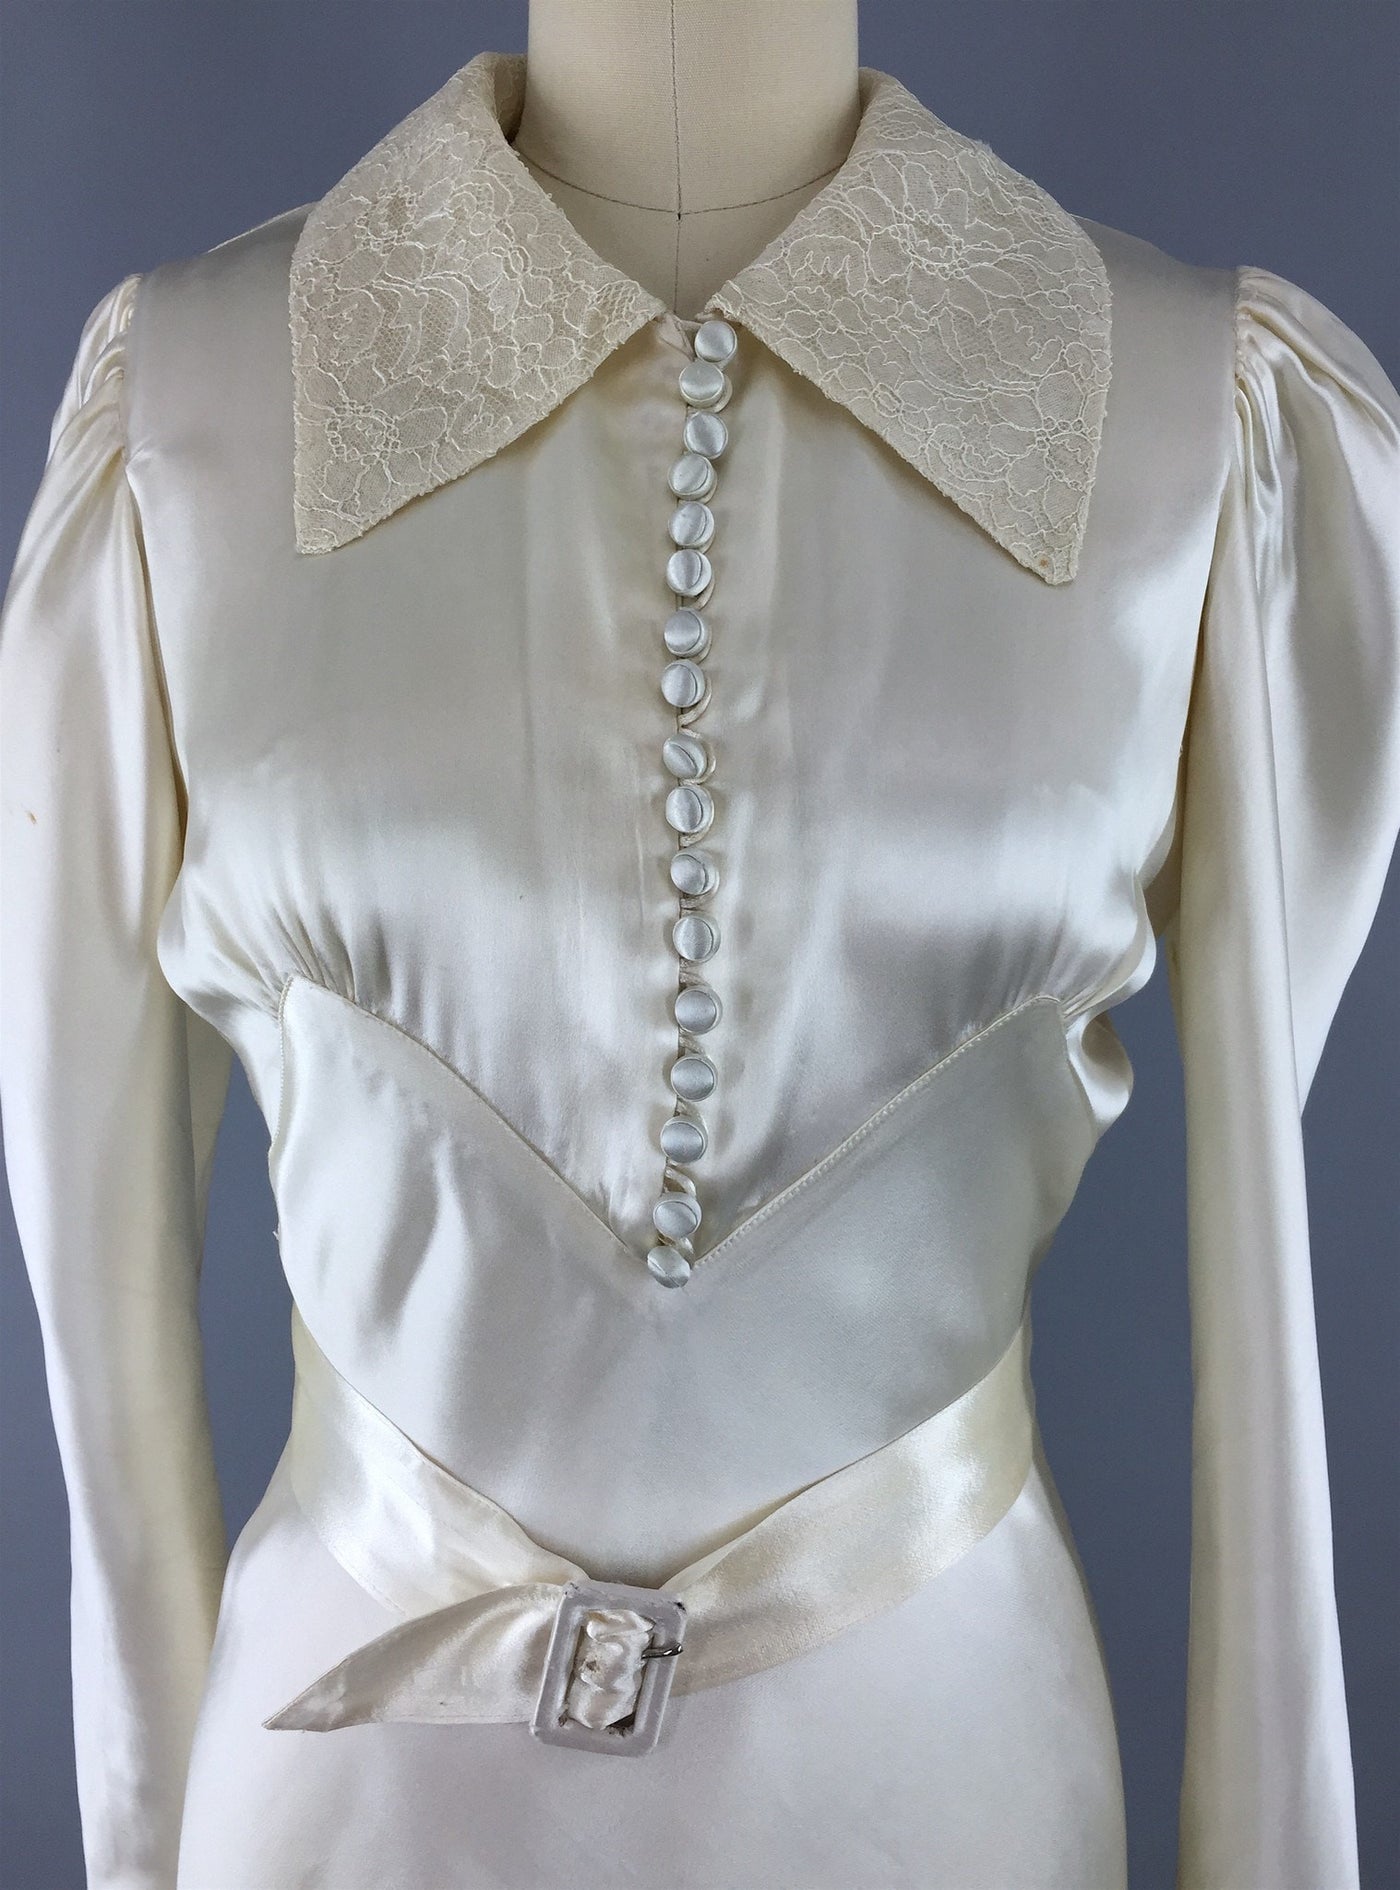 Vintage 1930s Ivory Bias Cut Satin and Lace Wedding Gown - ThisBlueBird